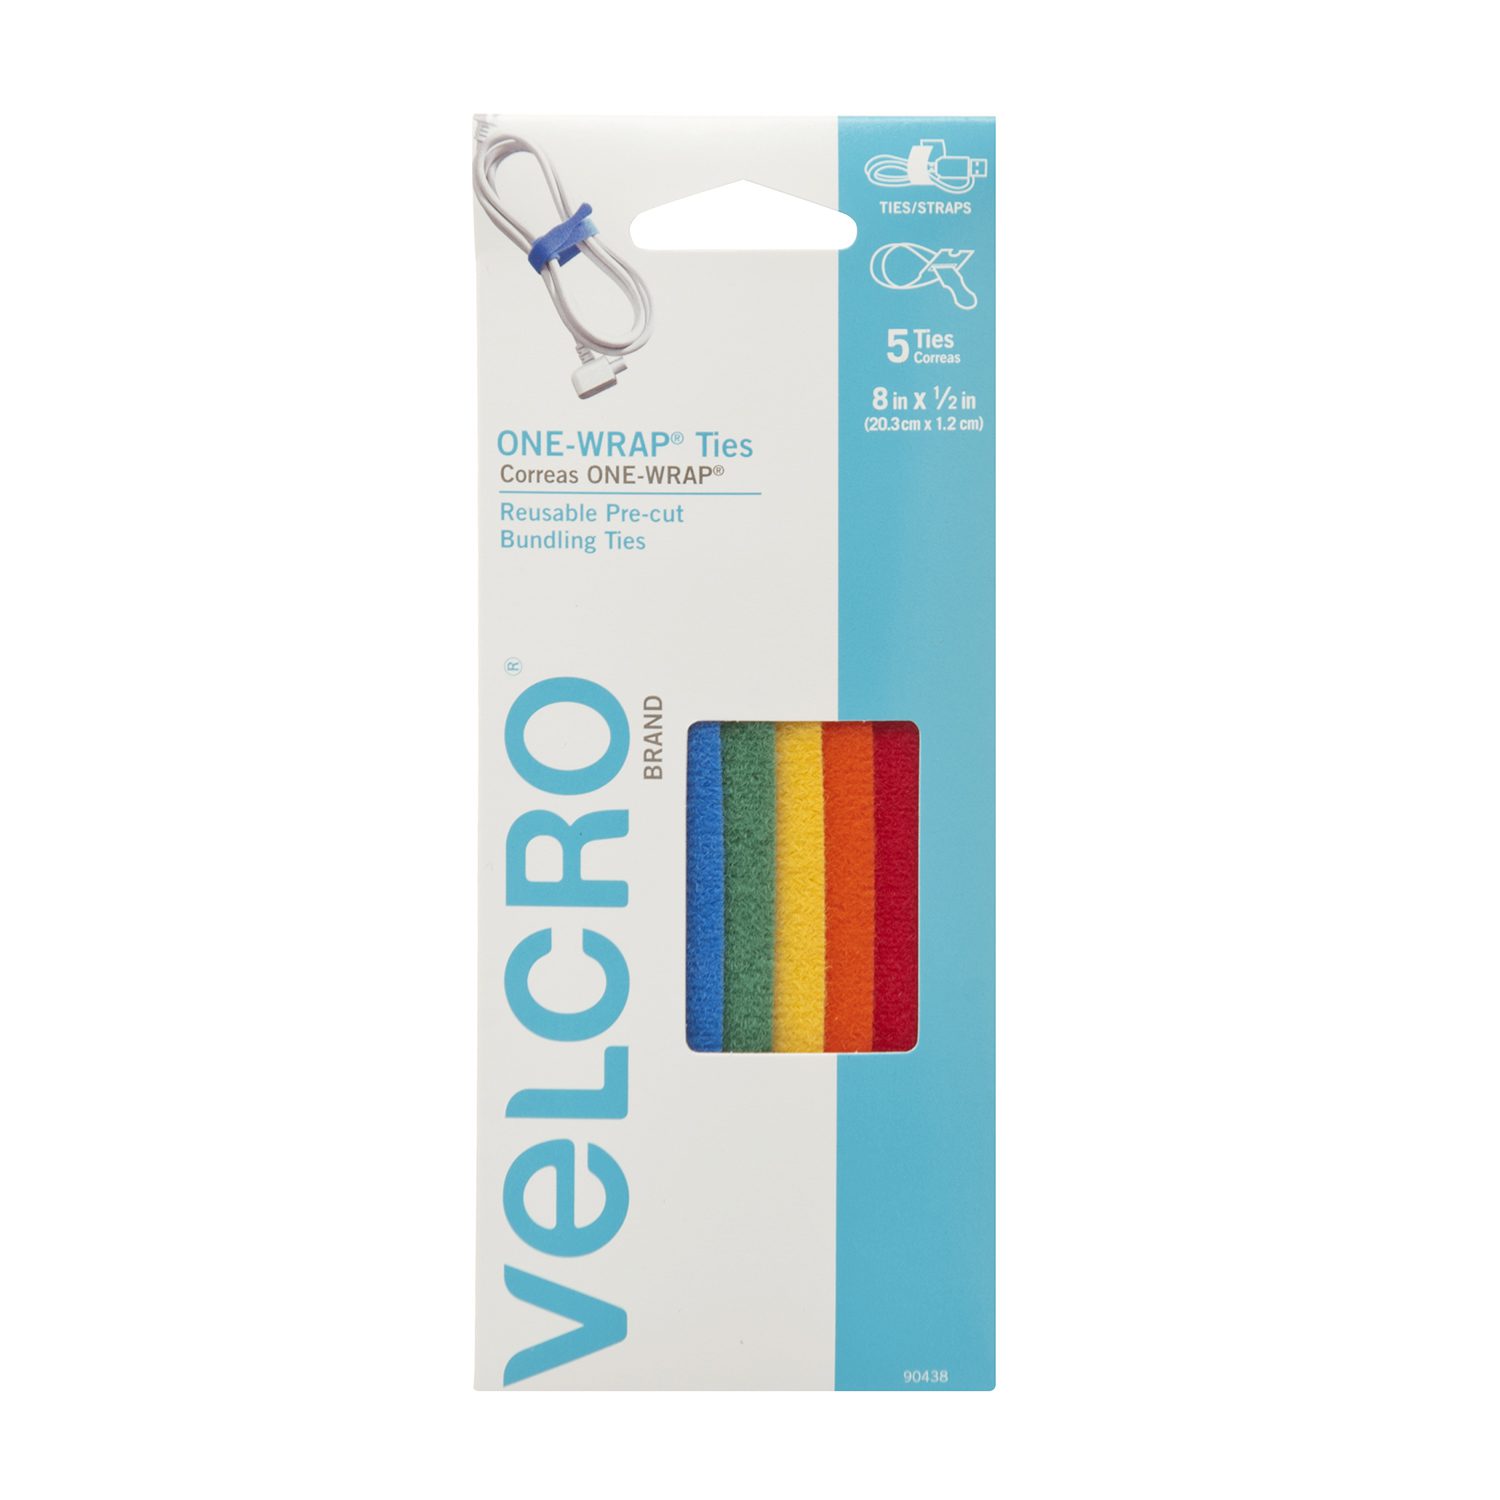 VELCRO® Brand ONE WRAP® Reusable Dbl Sided Strap 1/2" to 2" in Various Colors 